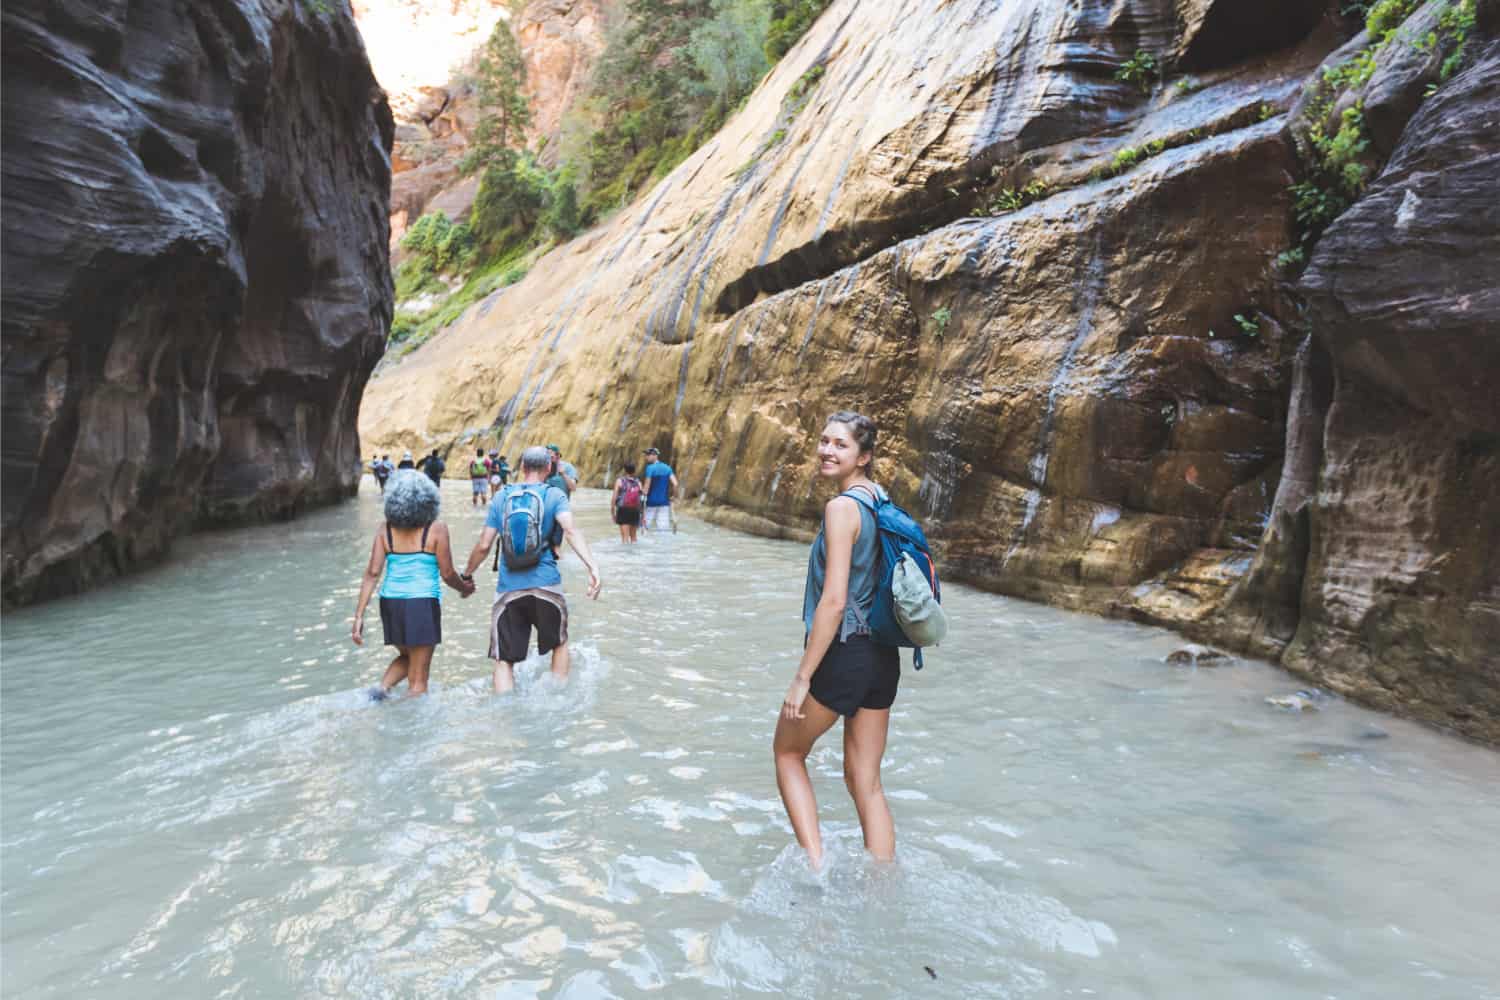 Different group of hikers wade through knee-deep water in a beautiful red slot canyon